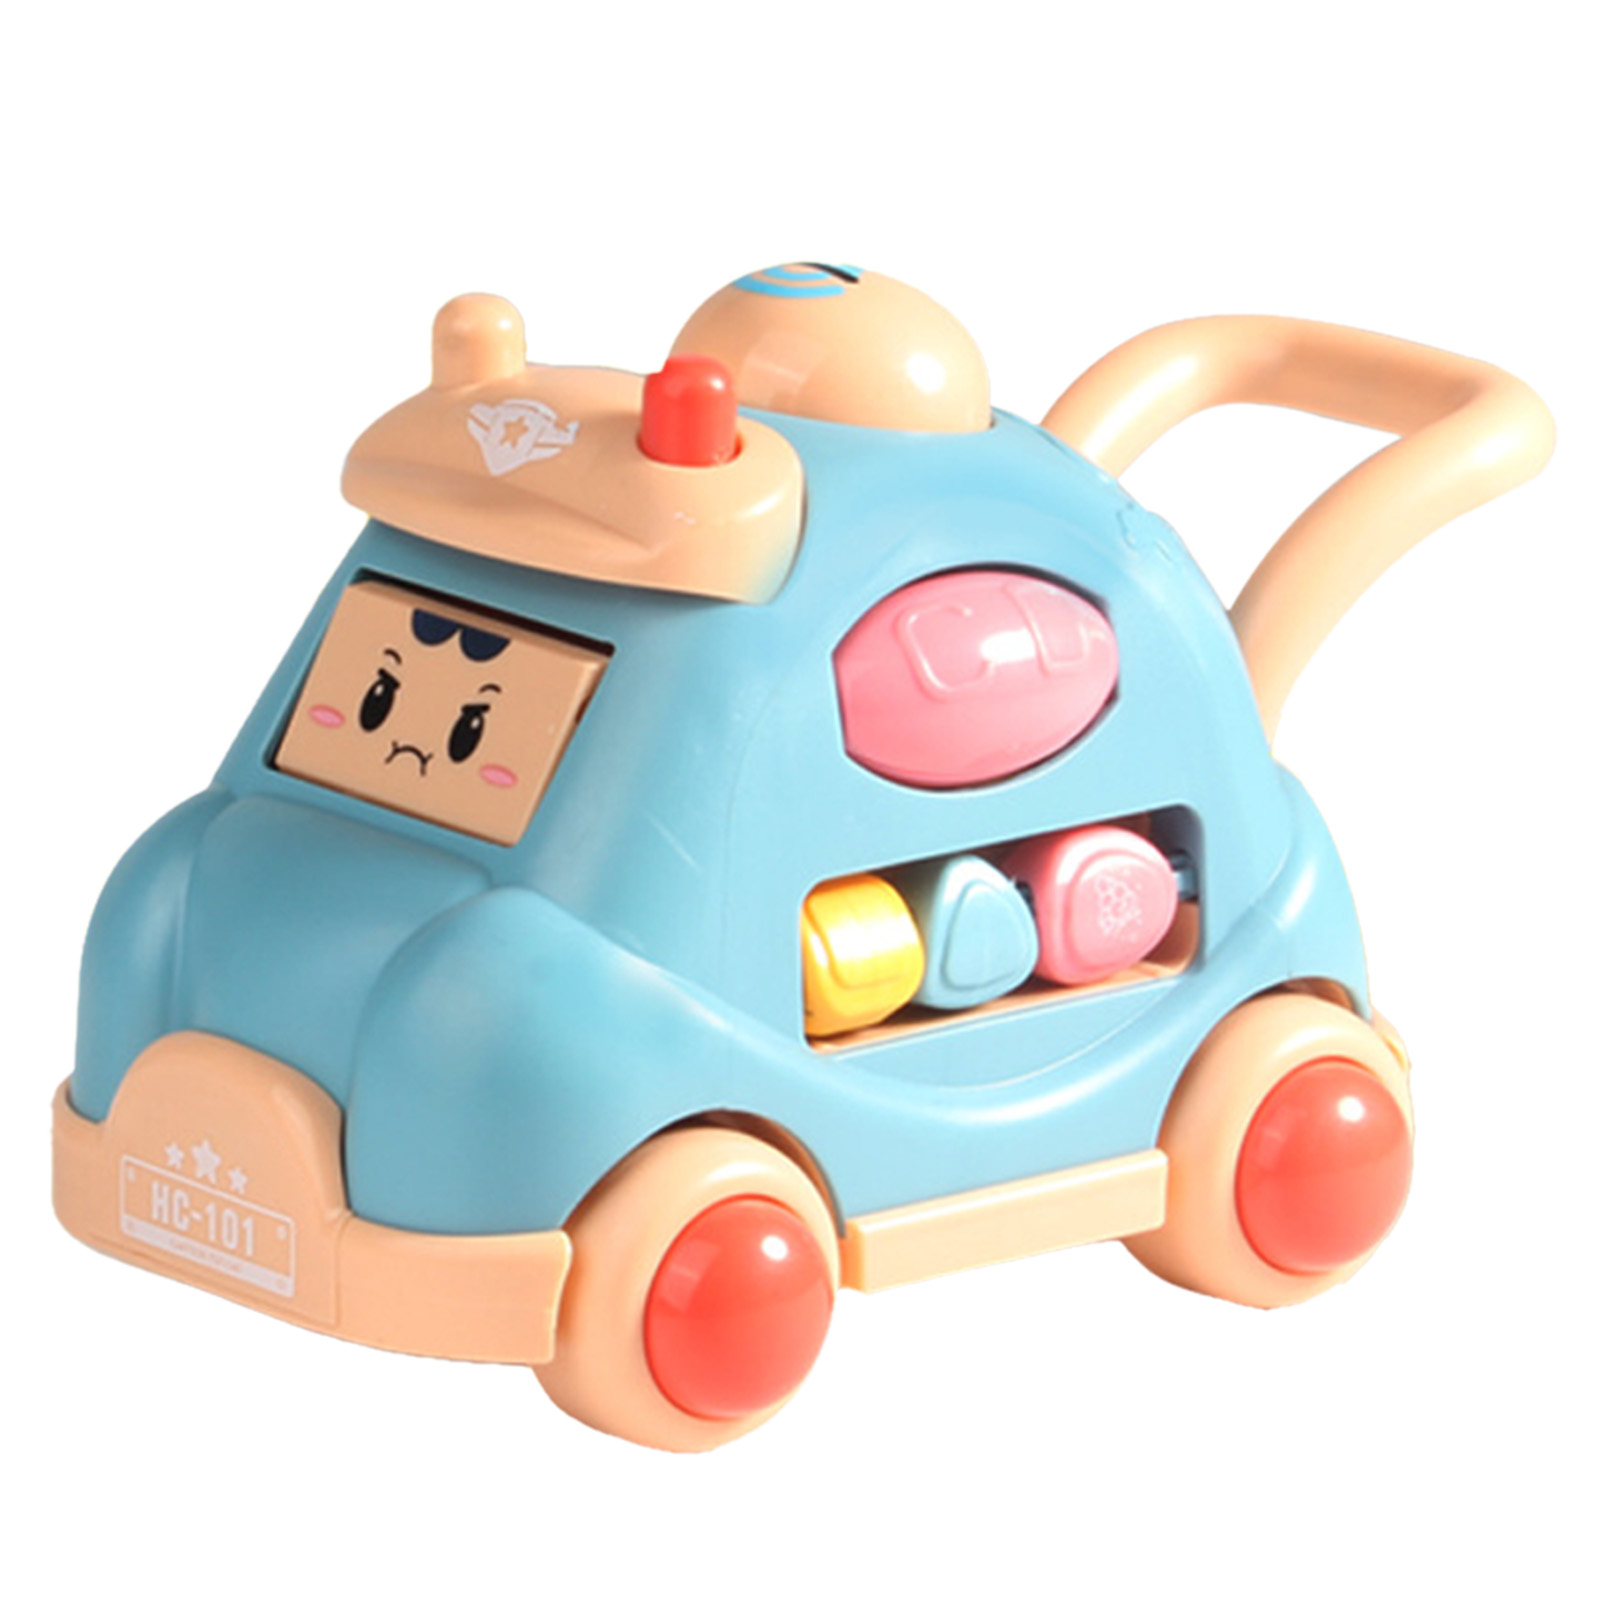 Inertia Car Toy For Kids Cartoon Face Changing Car Toy With Visible Colored Moving Gears Light Music Effects For Birthday Christmas Gifts